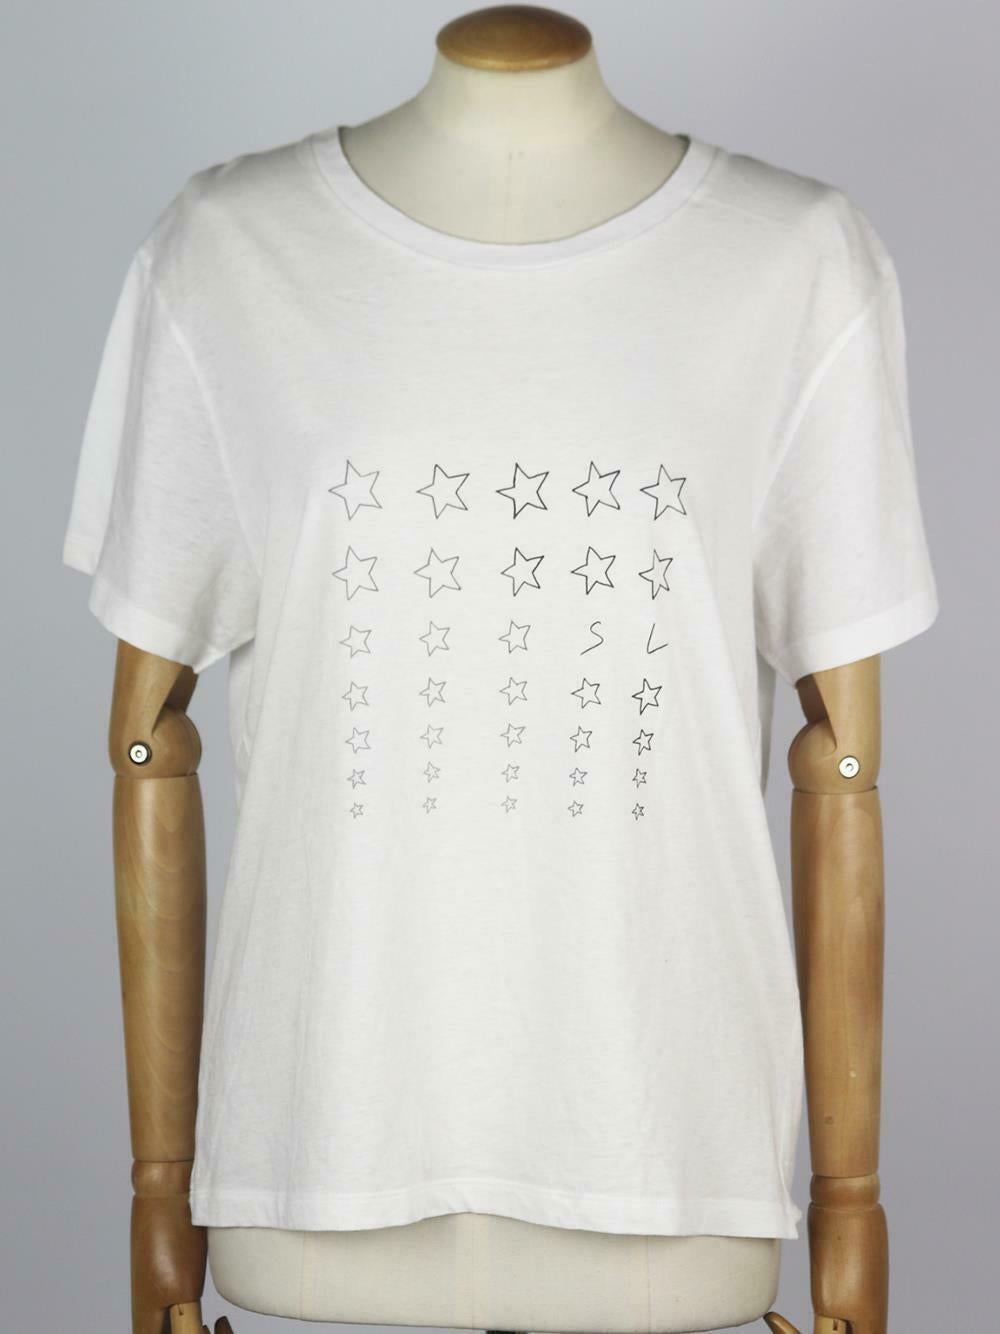 Saint Laurent's T-shirt is printed with one of the house's iconic logo - in a graphic typeface and illustrated with stars, it's made from white cotton-jersey and is cut for a relaxed fit with slightly elongated sleeves that are perfect for